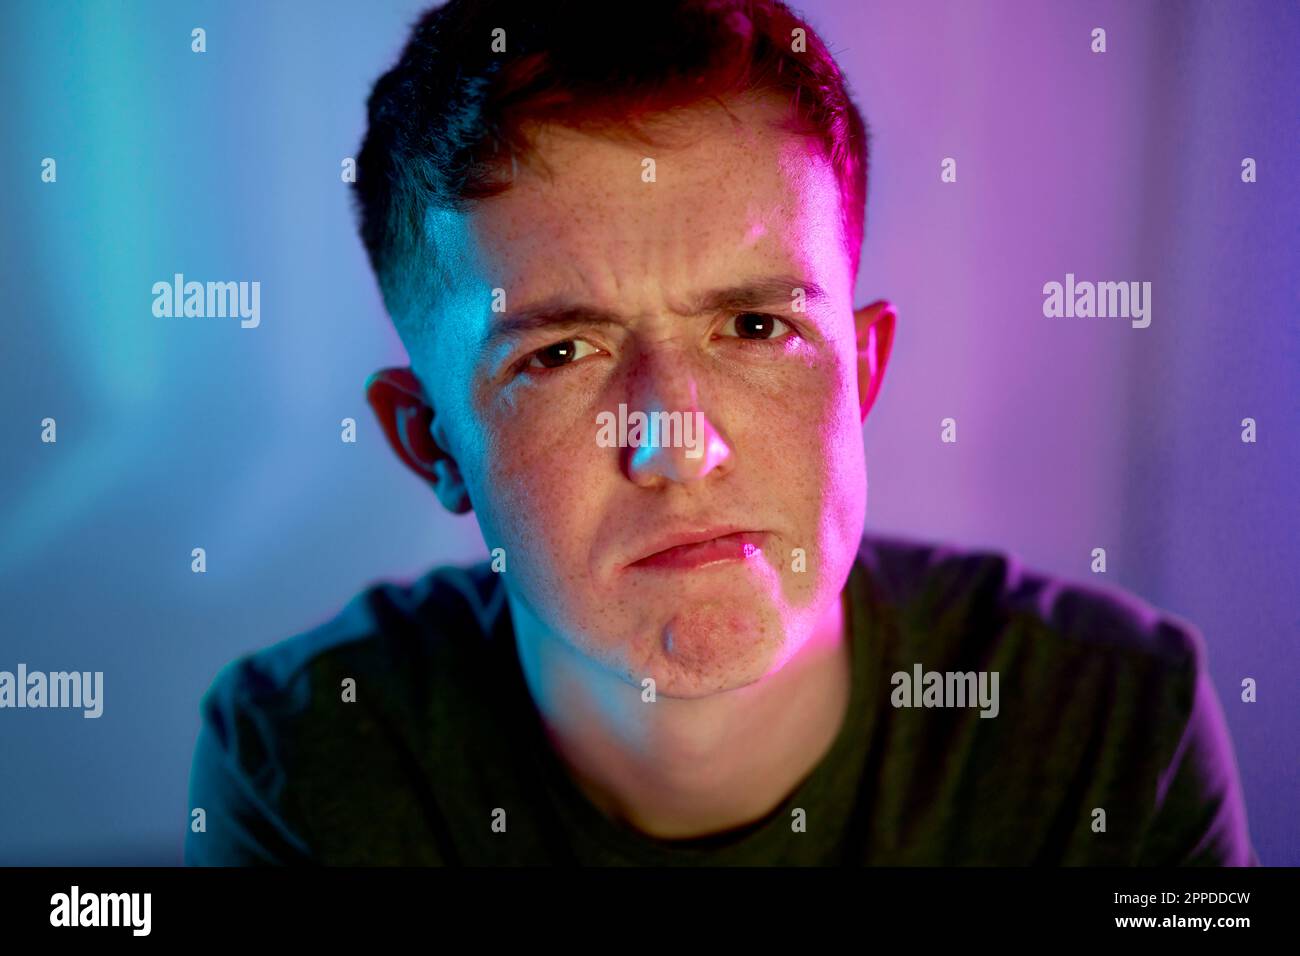 Young man with facial expression with illuminated neon light on face Stock Photo